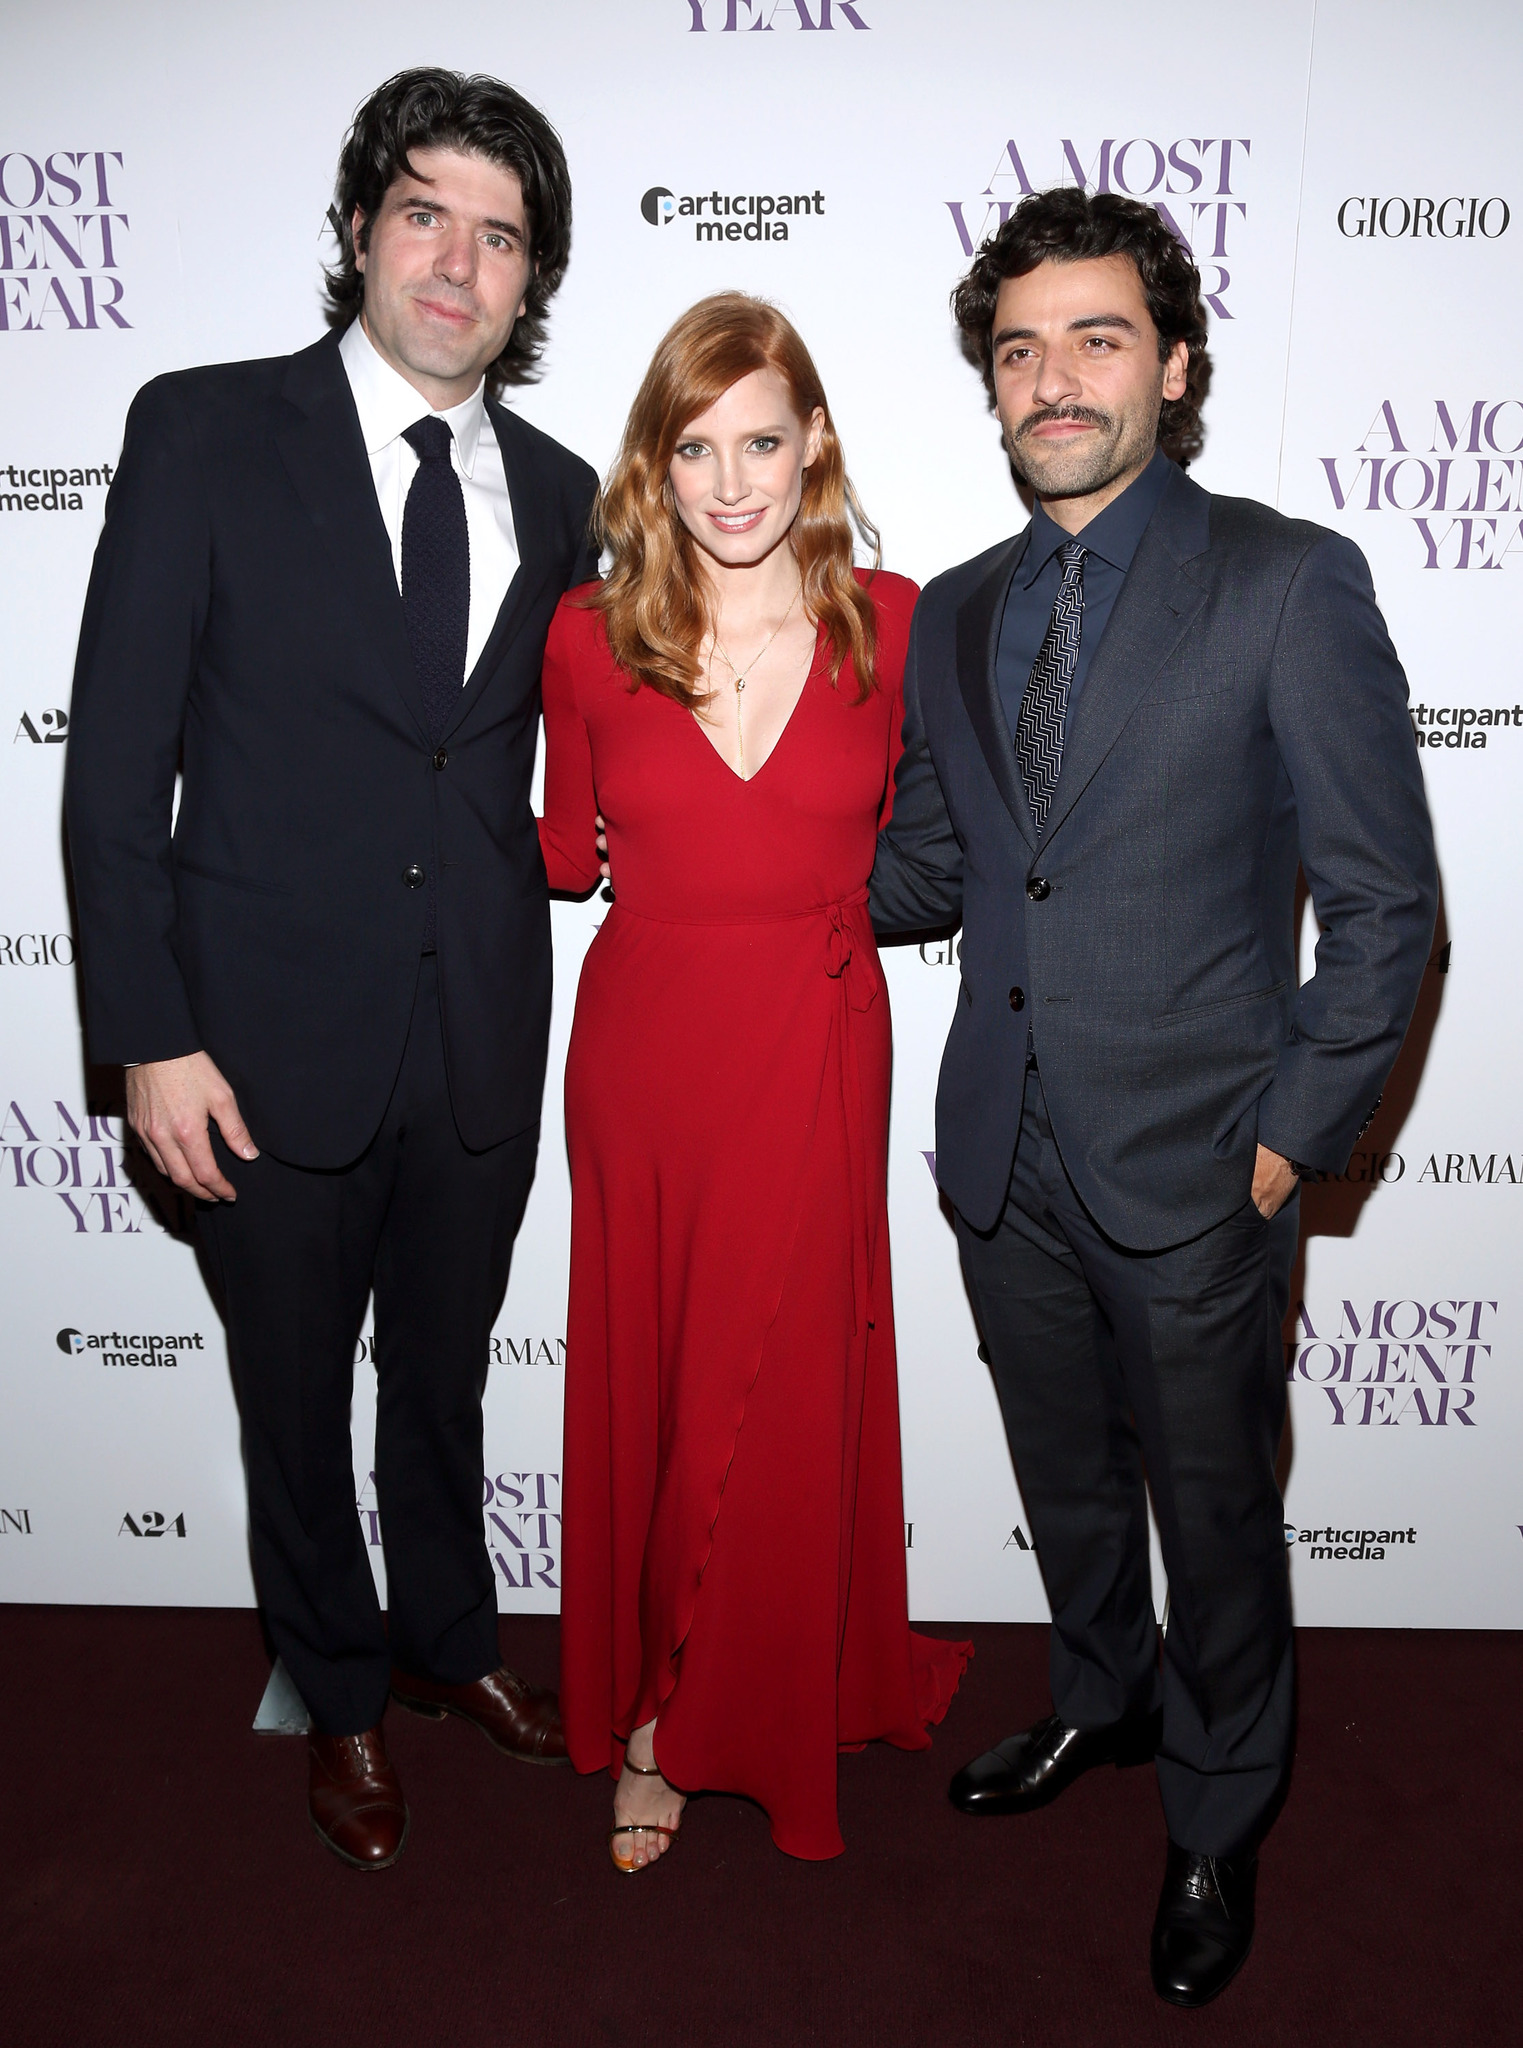 J.C. Chandor, Oscar Isaac and Jessica Chastain at event of A Most Violent Year (2014)